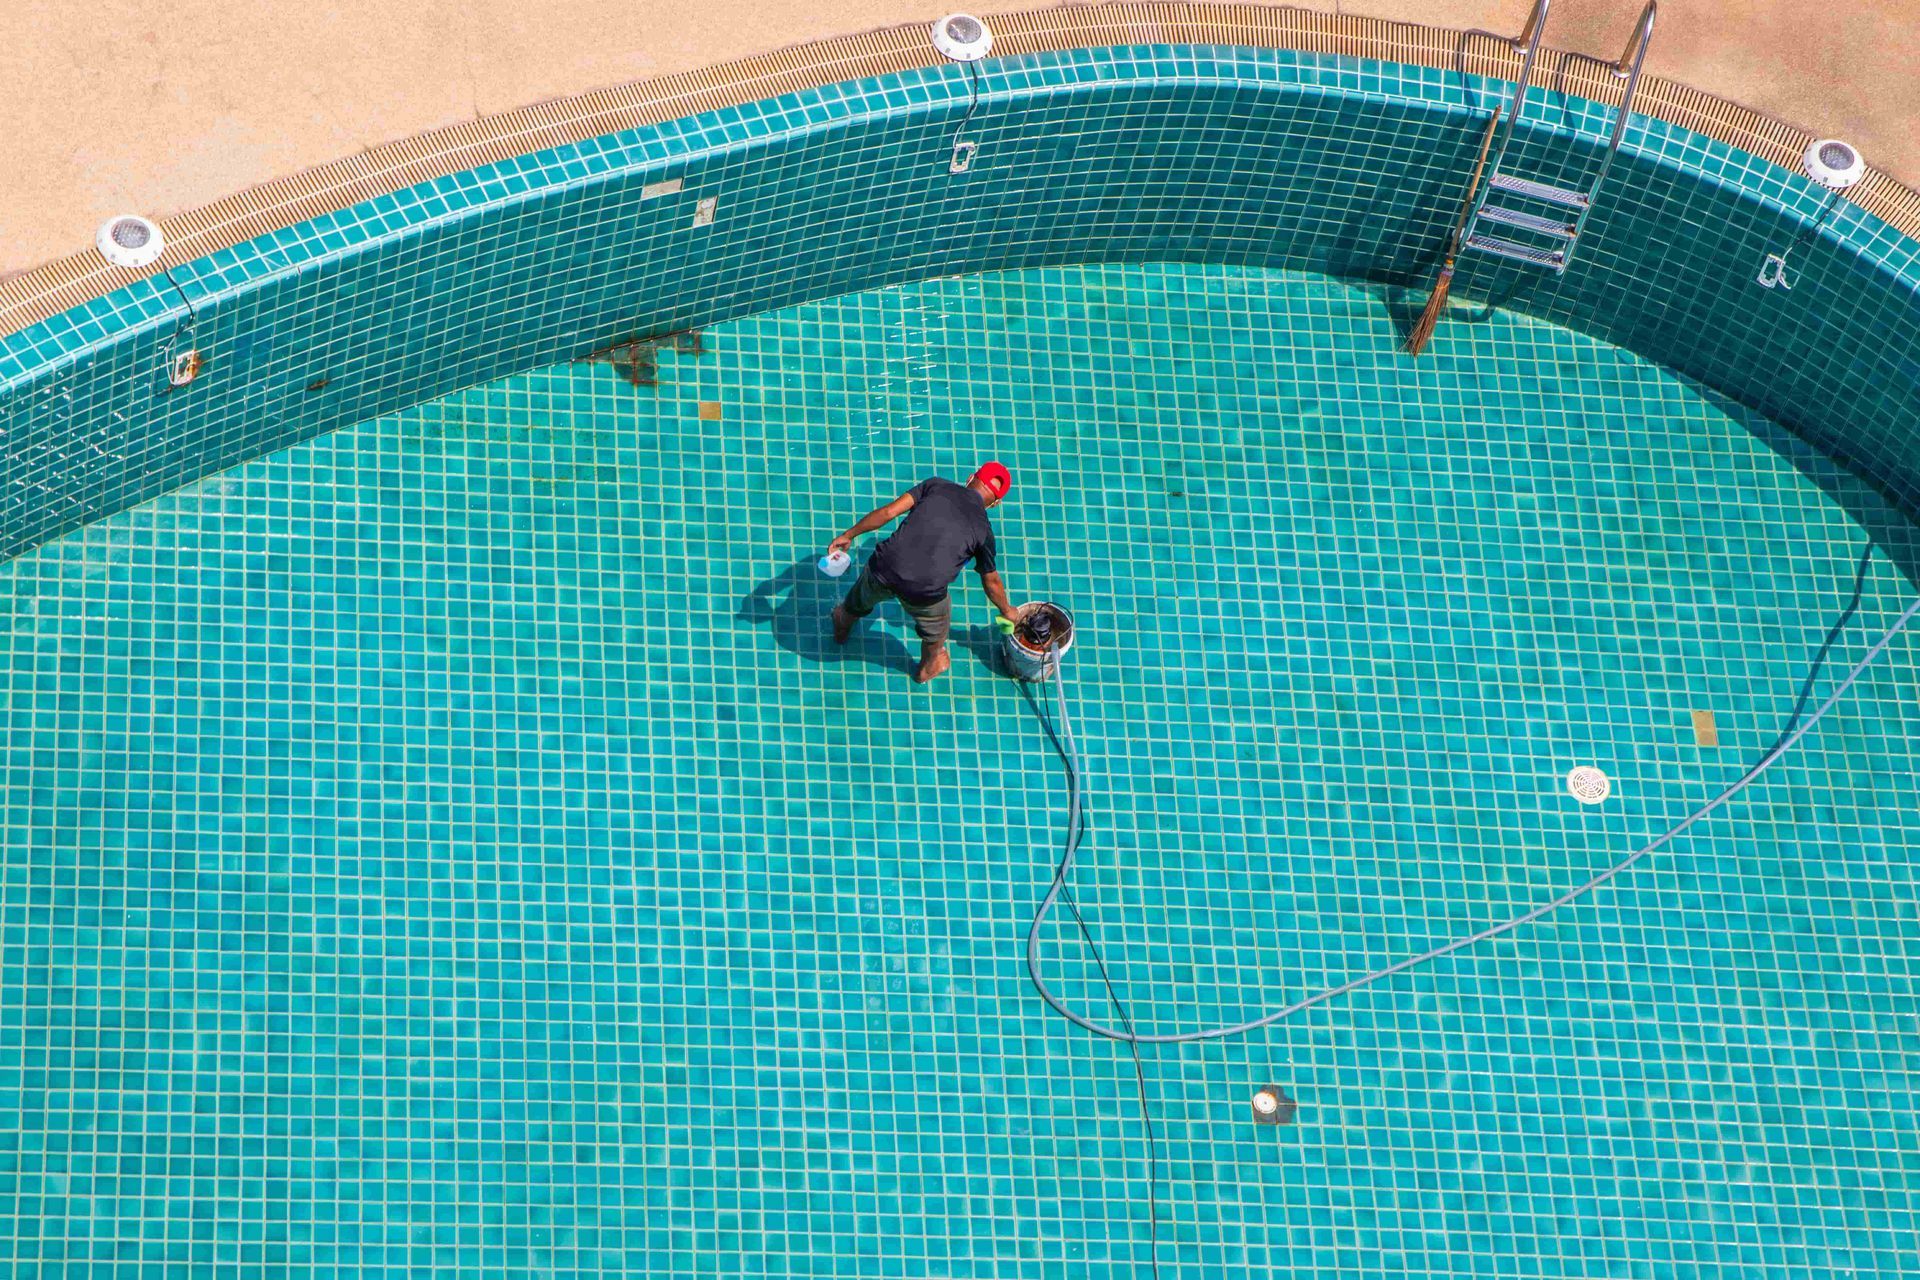 A man at the bottom of a drained swimming pool